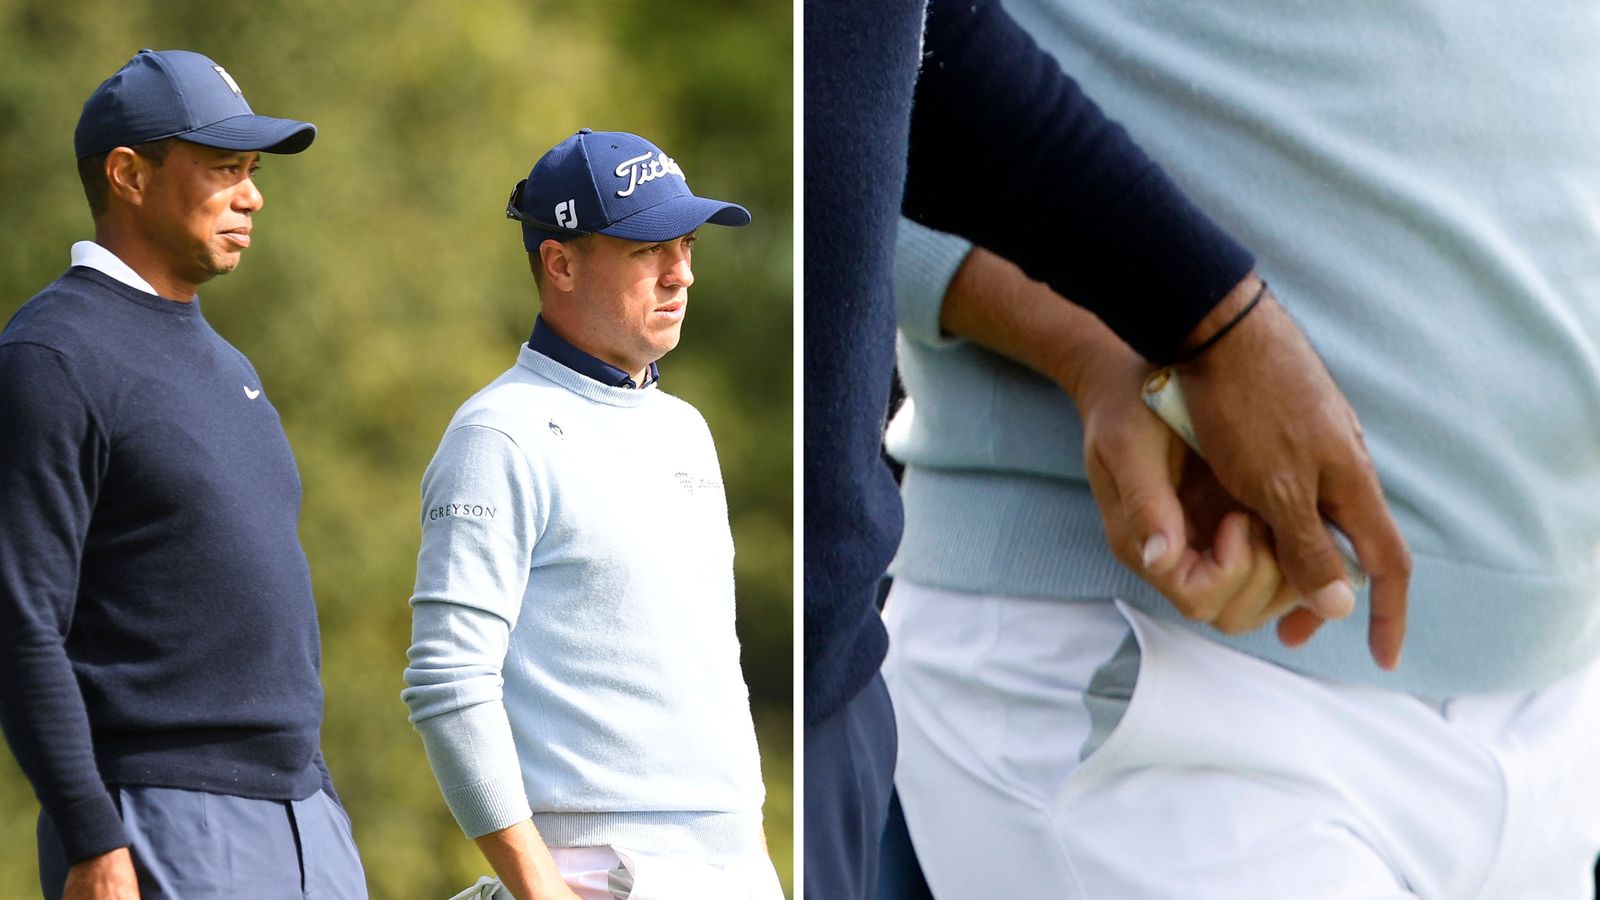 Tiger Woods gives fellow golfer Justin Thomas a tampon after hitting ball further